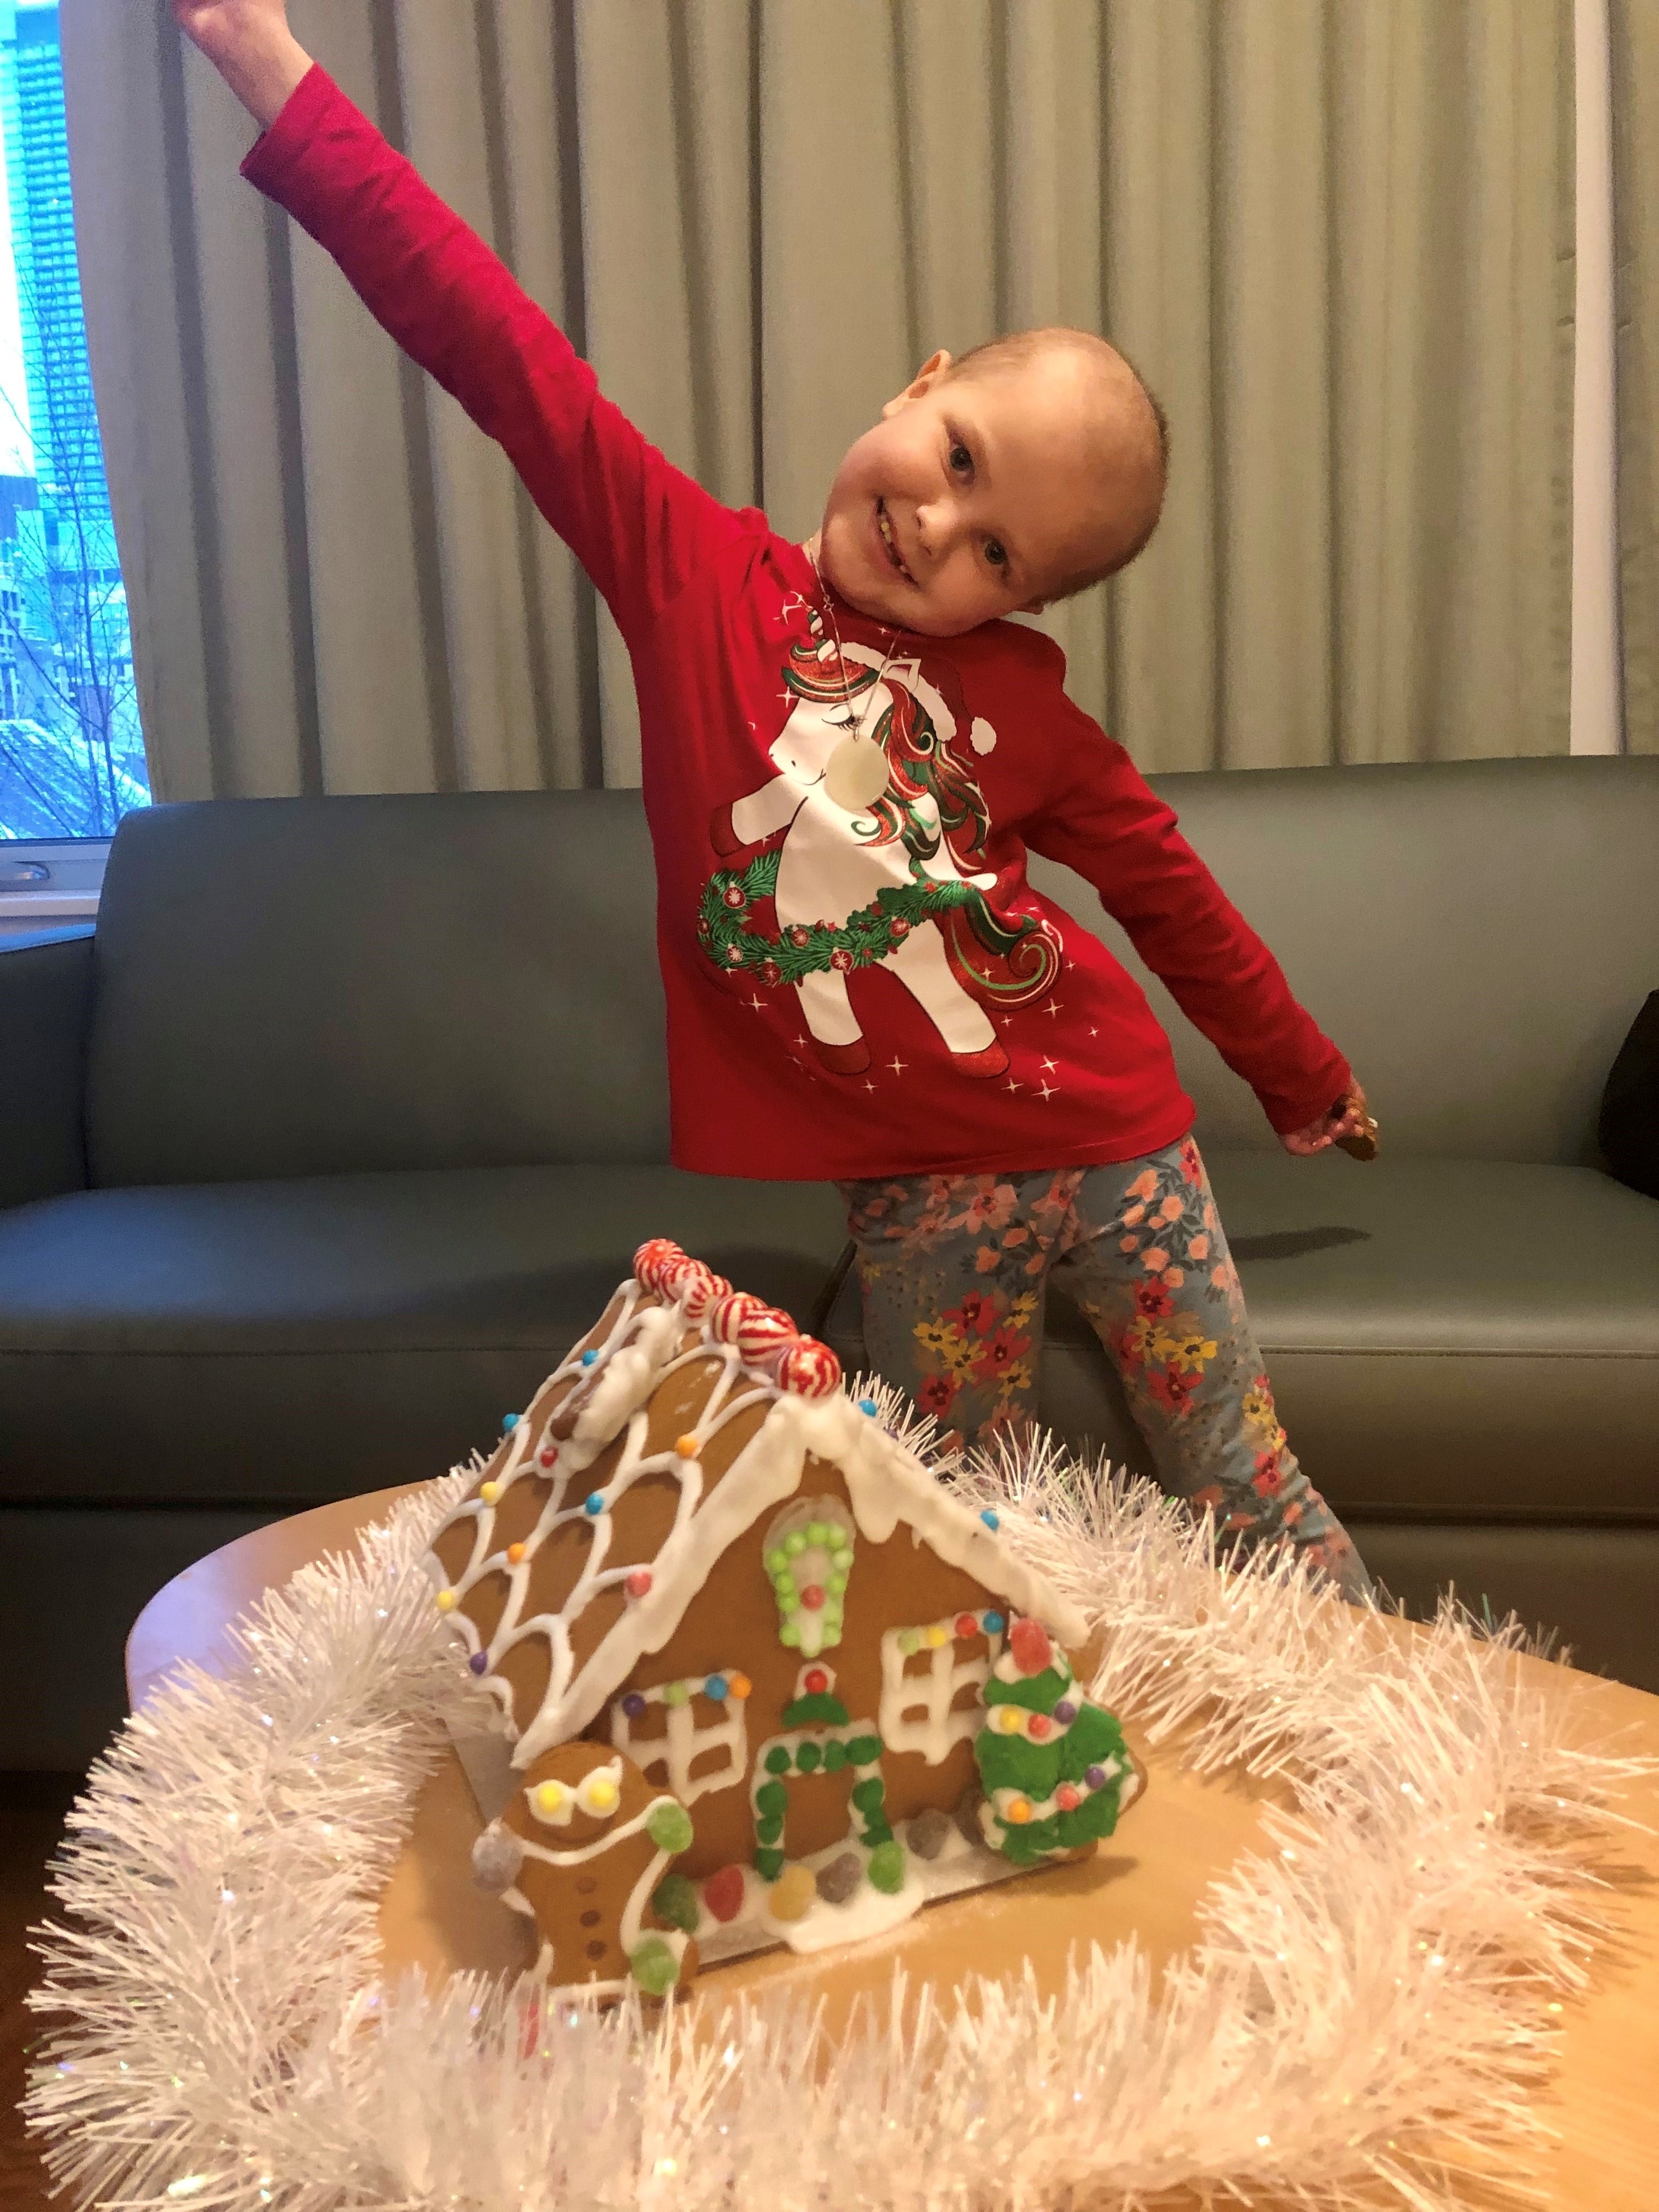 Emiliya with her gingerbread house